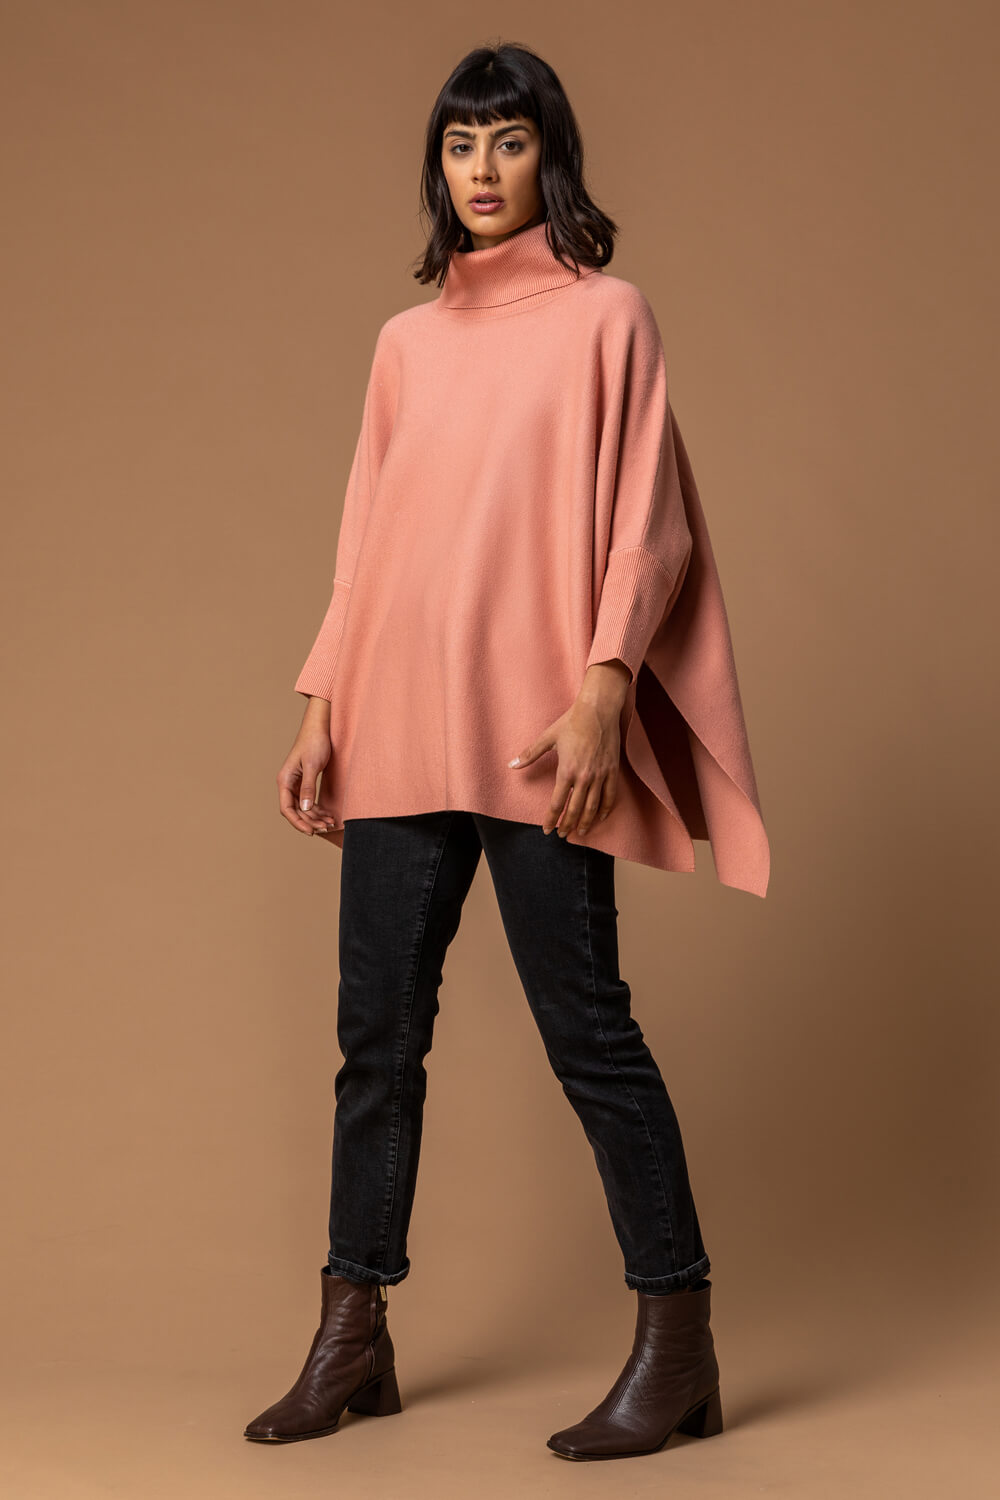 PINK Longline Roll Neck Poncho Jumper, Image 3 of 4